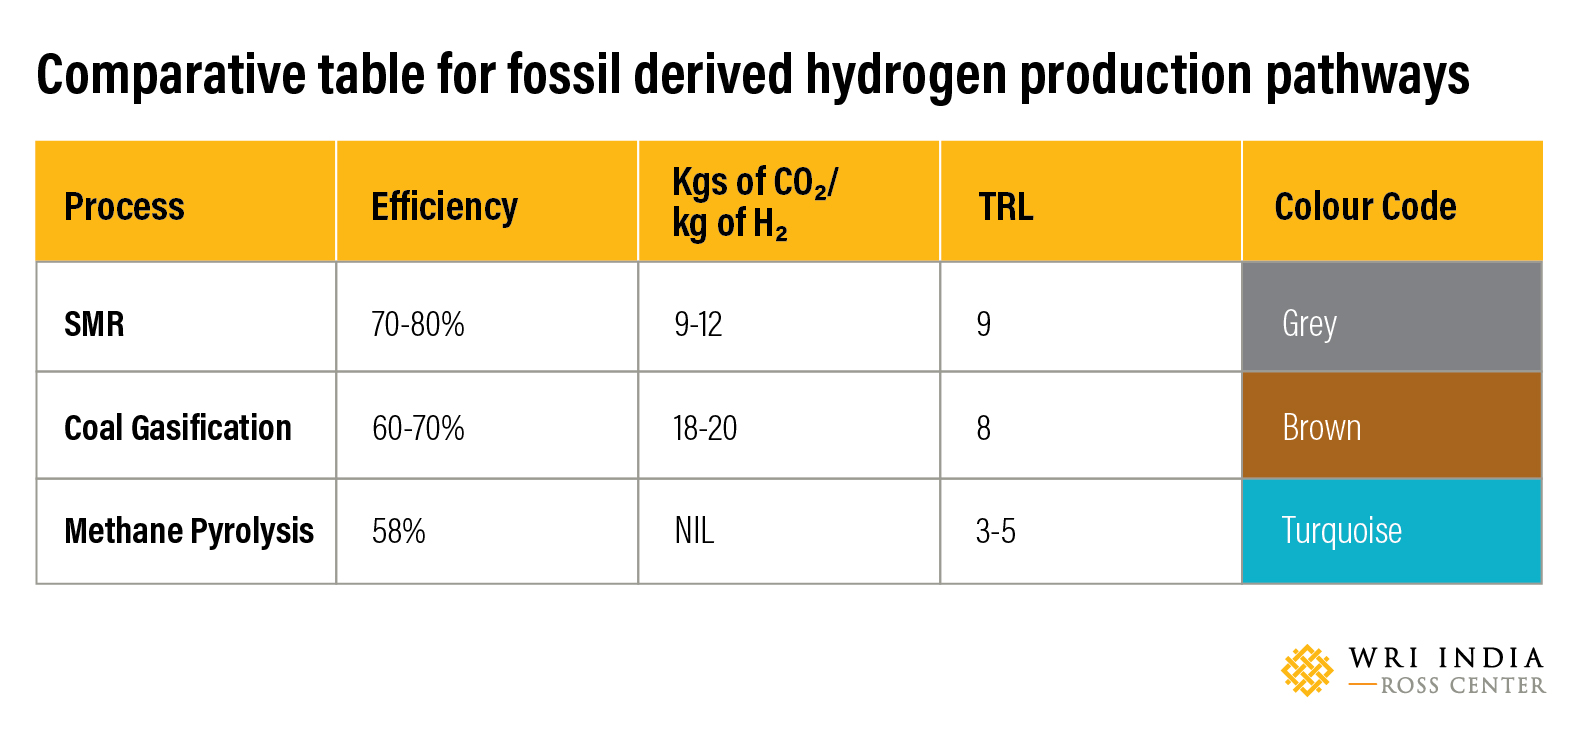 Comparative table for fossil derived hydrogen production pathways